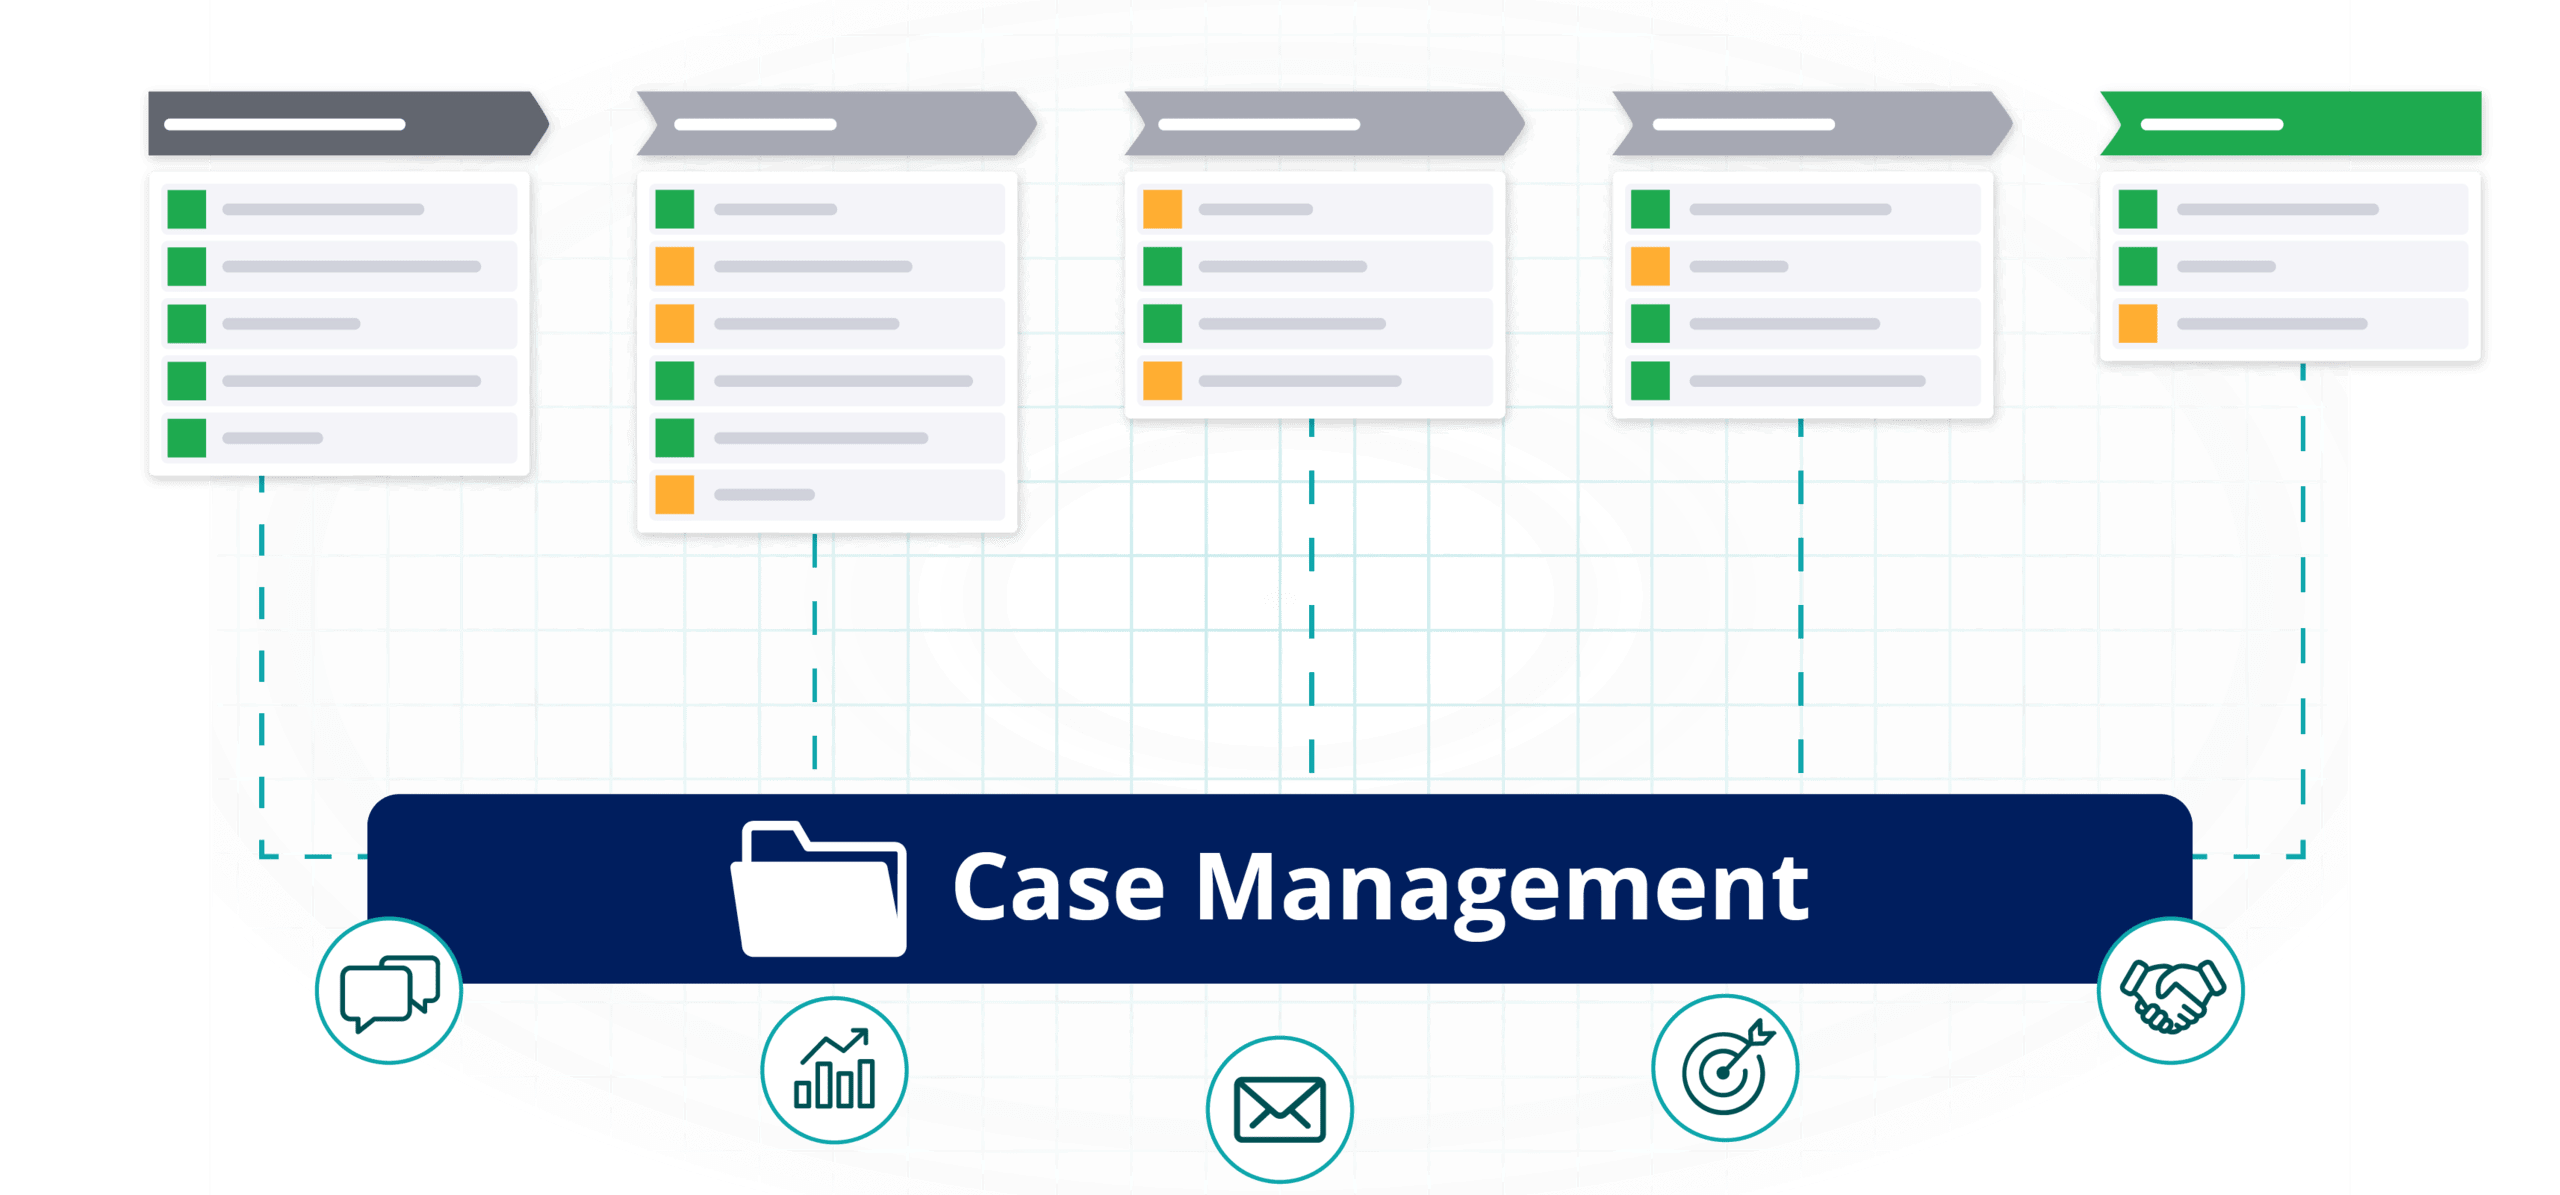 Graphic art depicting the process of case management